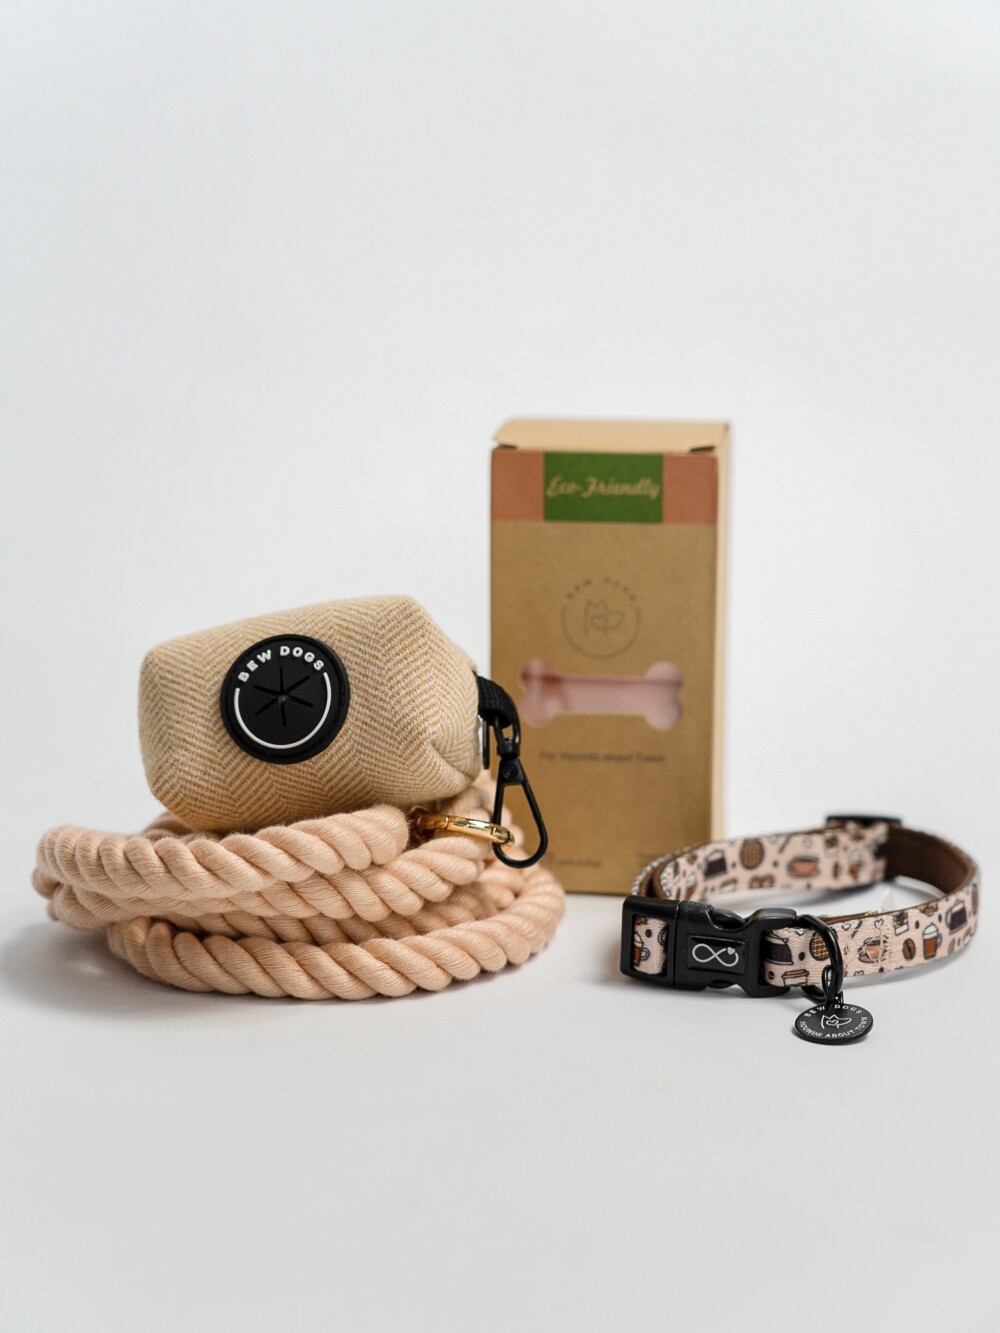 A cream rope lead, herringbone poop bag holder, a box of eco-friendly poop bags and a cream collar, against a white background.